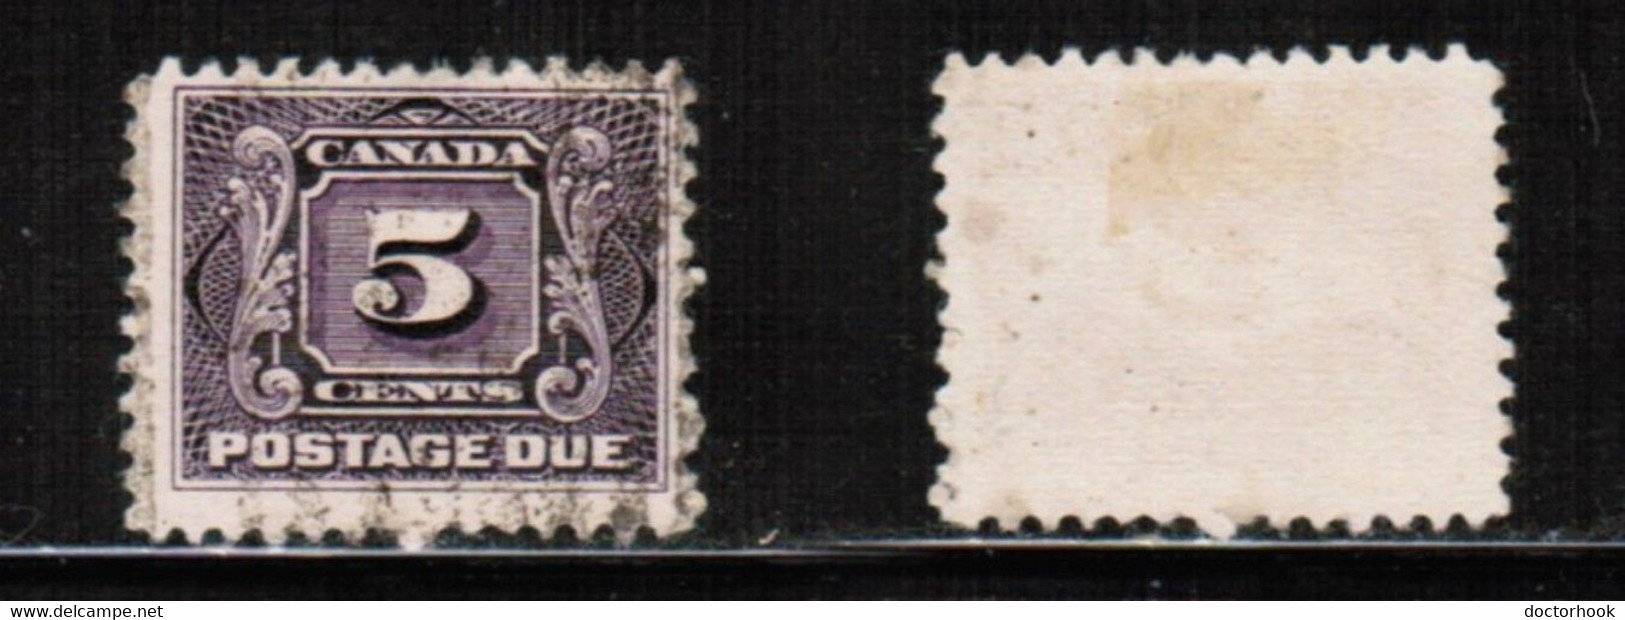 CANADA   Scott # J 4 USED (CONDITION AS PER SCAN) (CAN-101) - Strafport